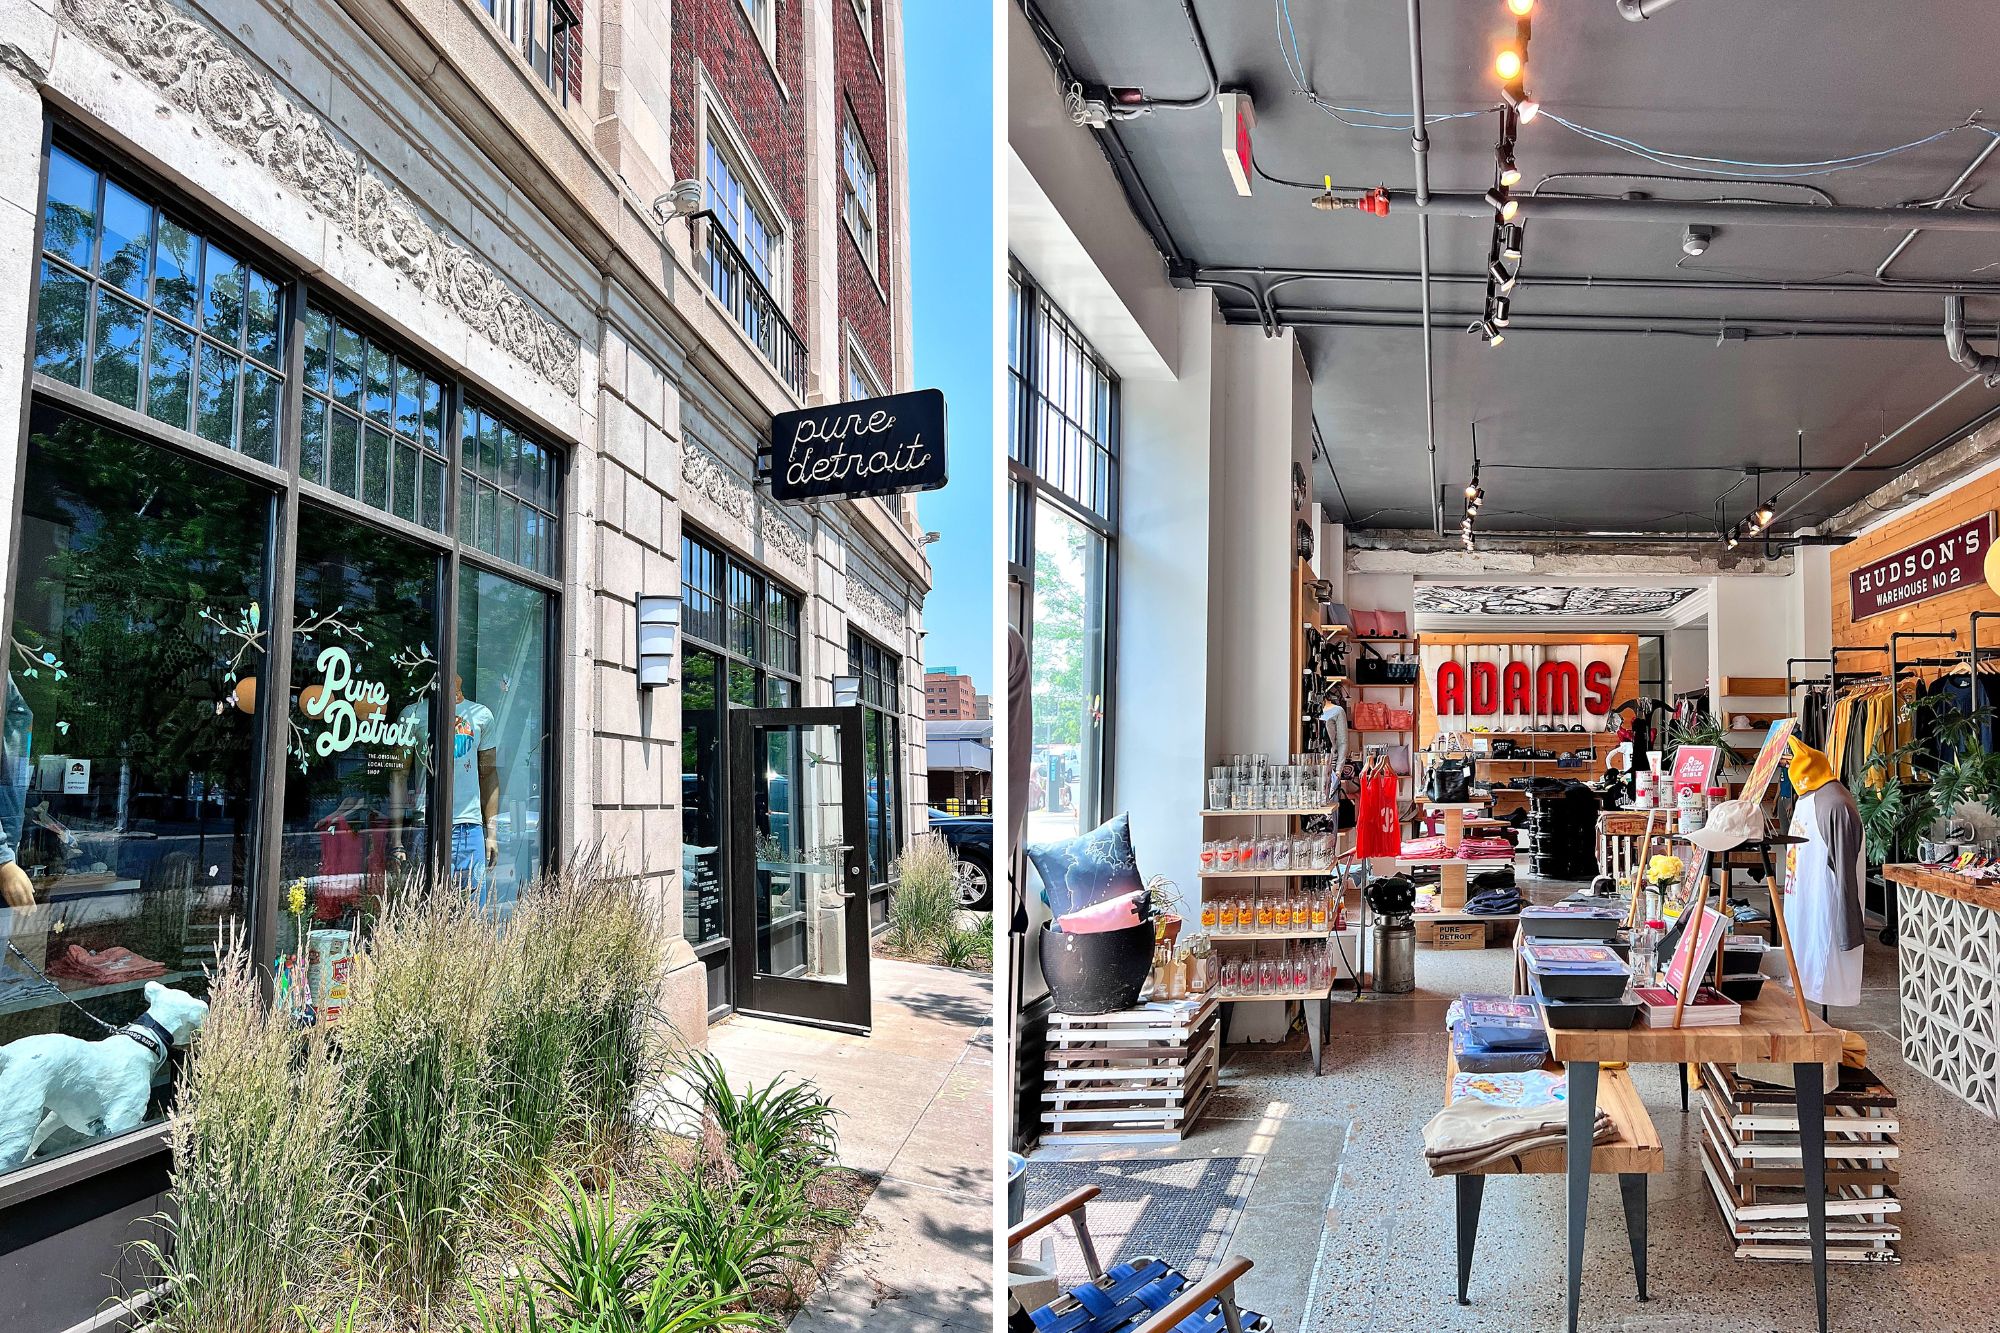 Exterior and interior of Pure Detroit's shop